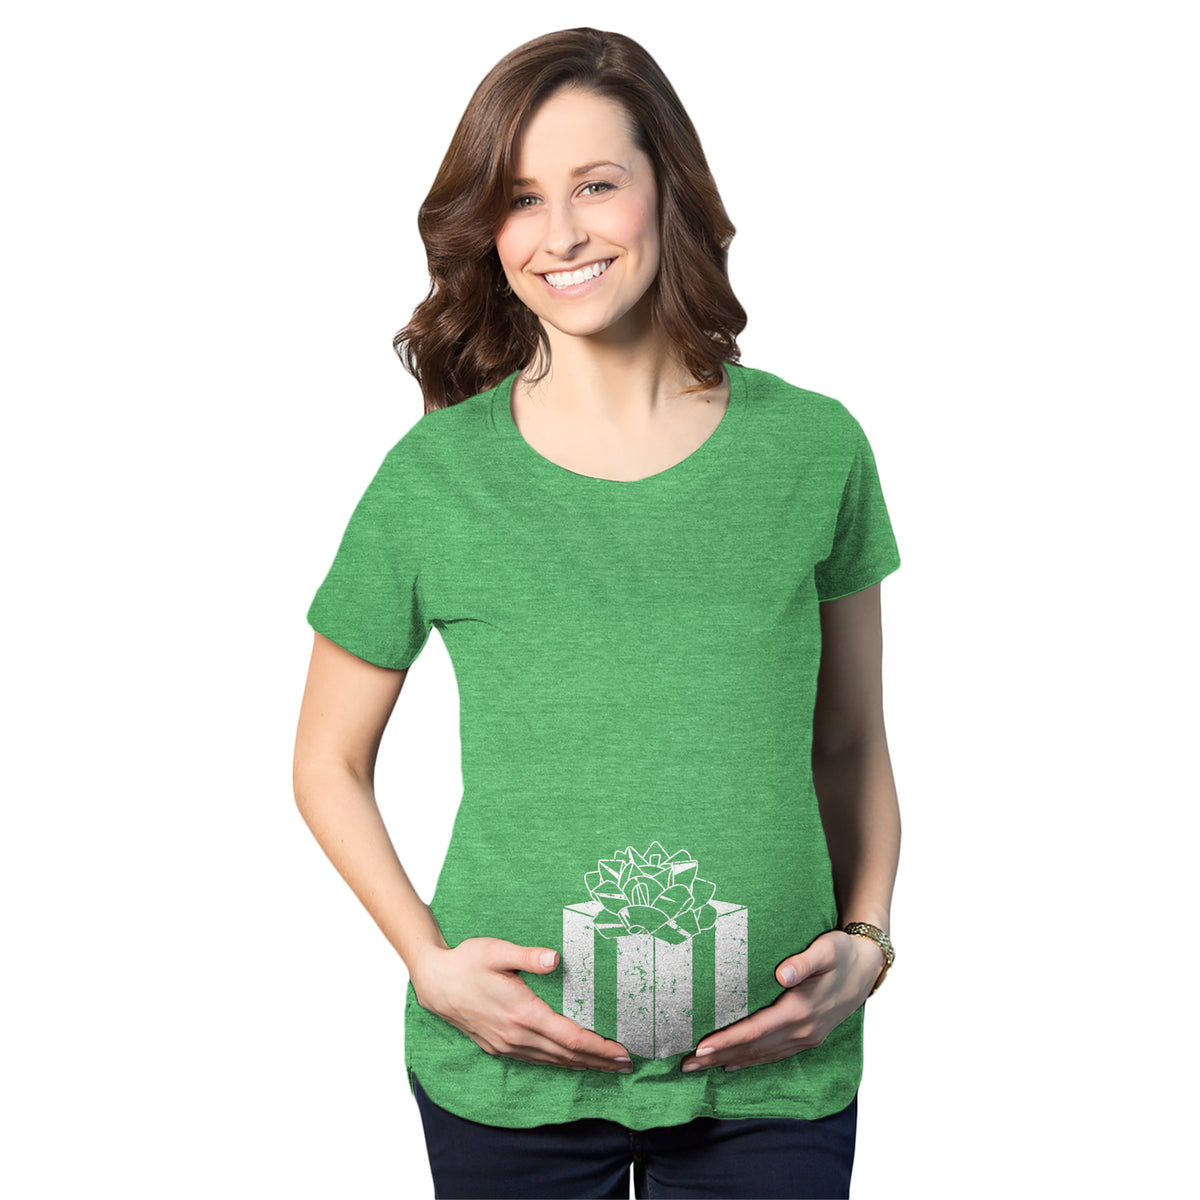 Funny Heather Green Belly Present Maternity T Shirt Nerdy Christmas Tee